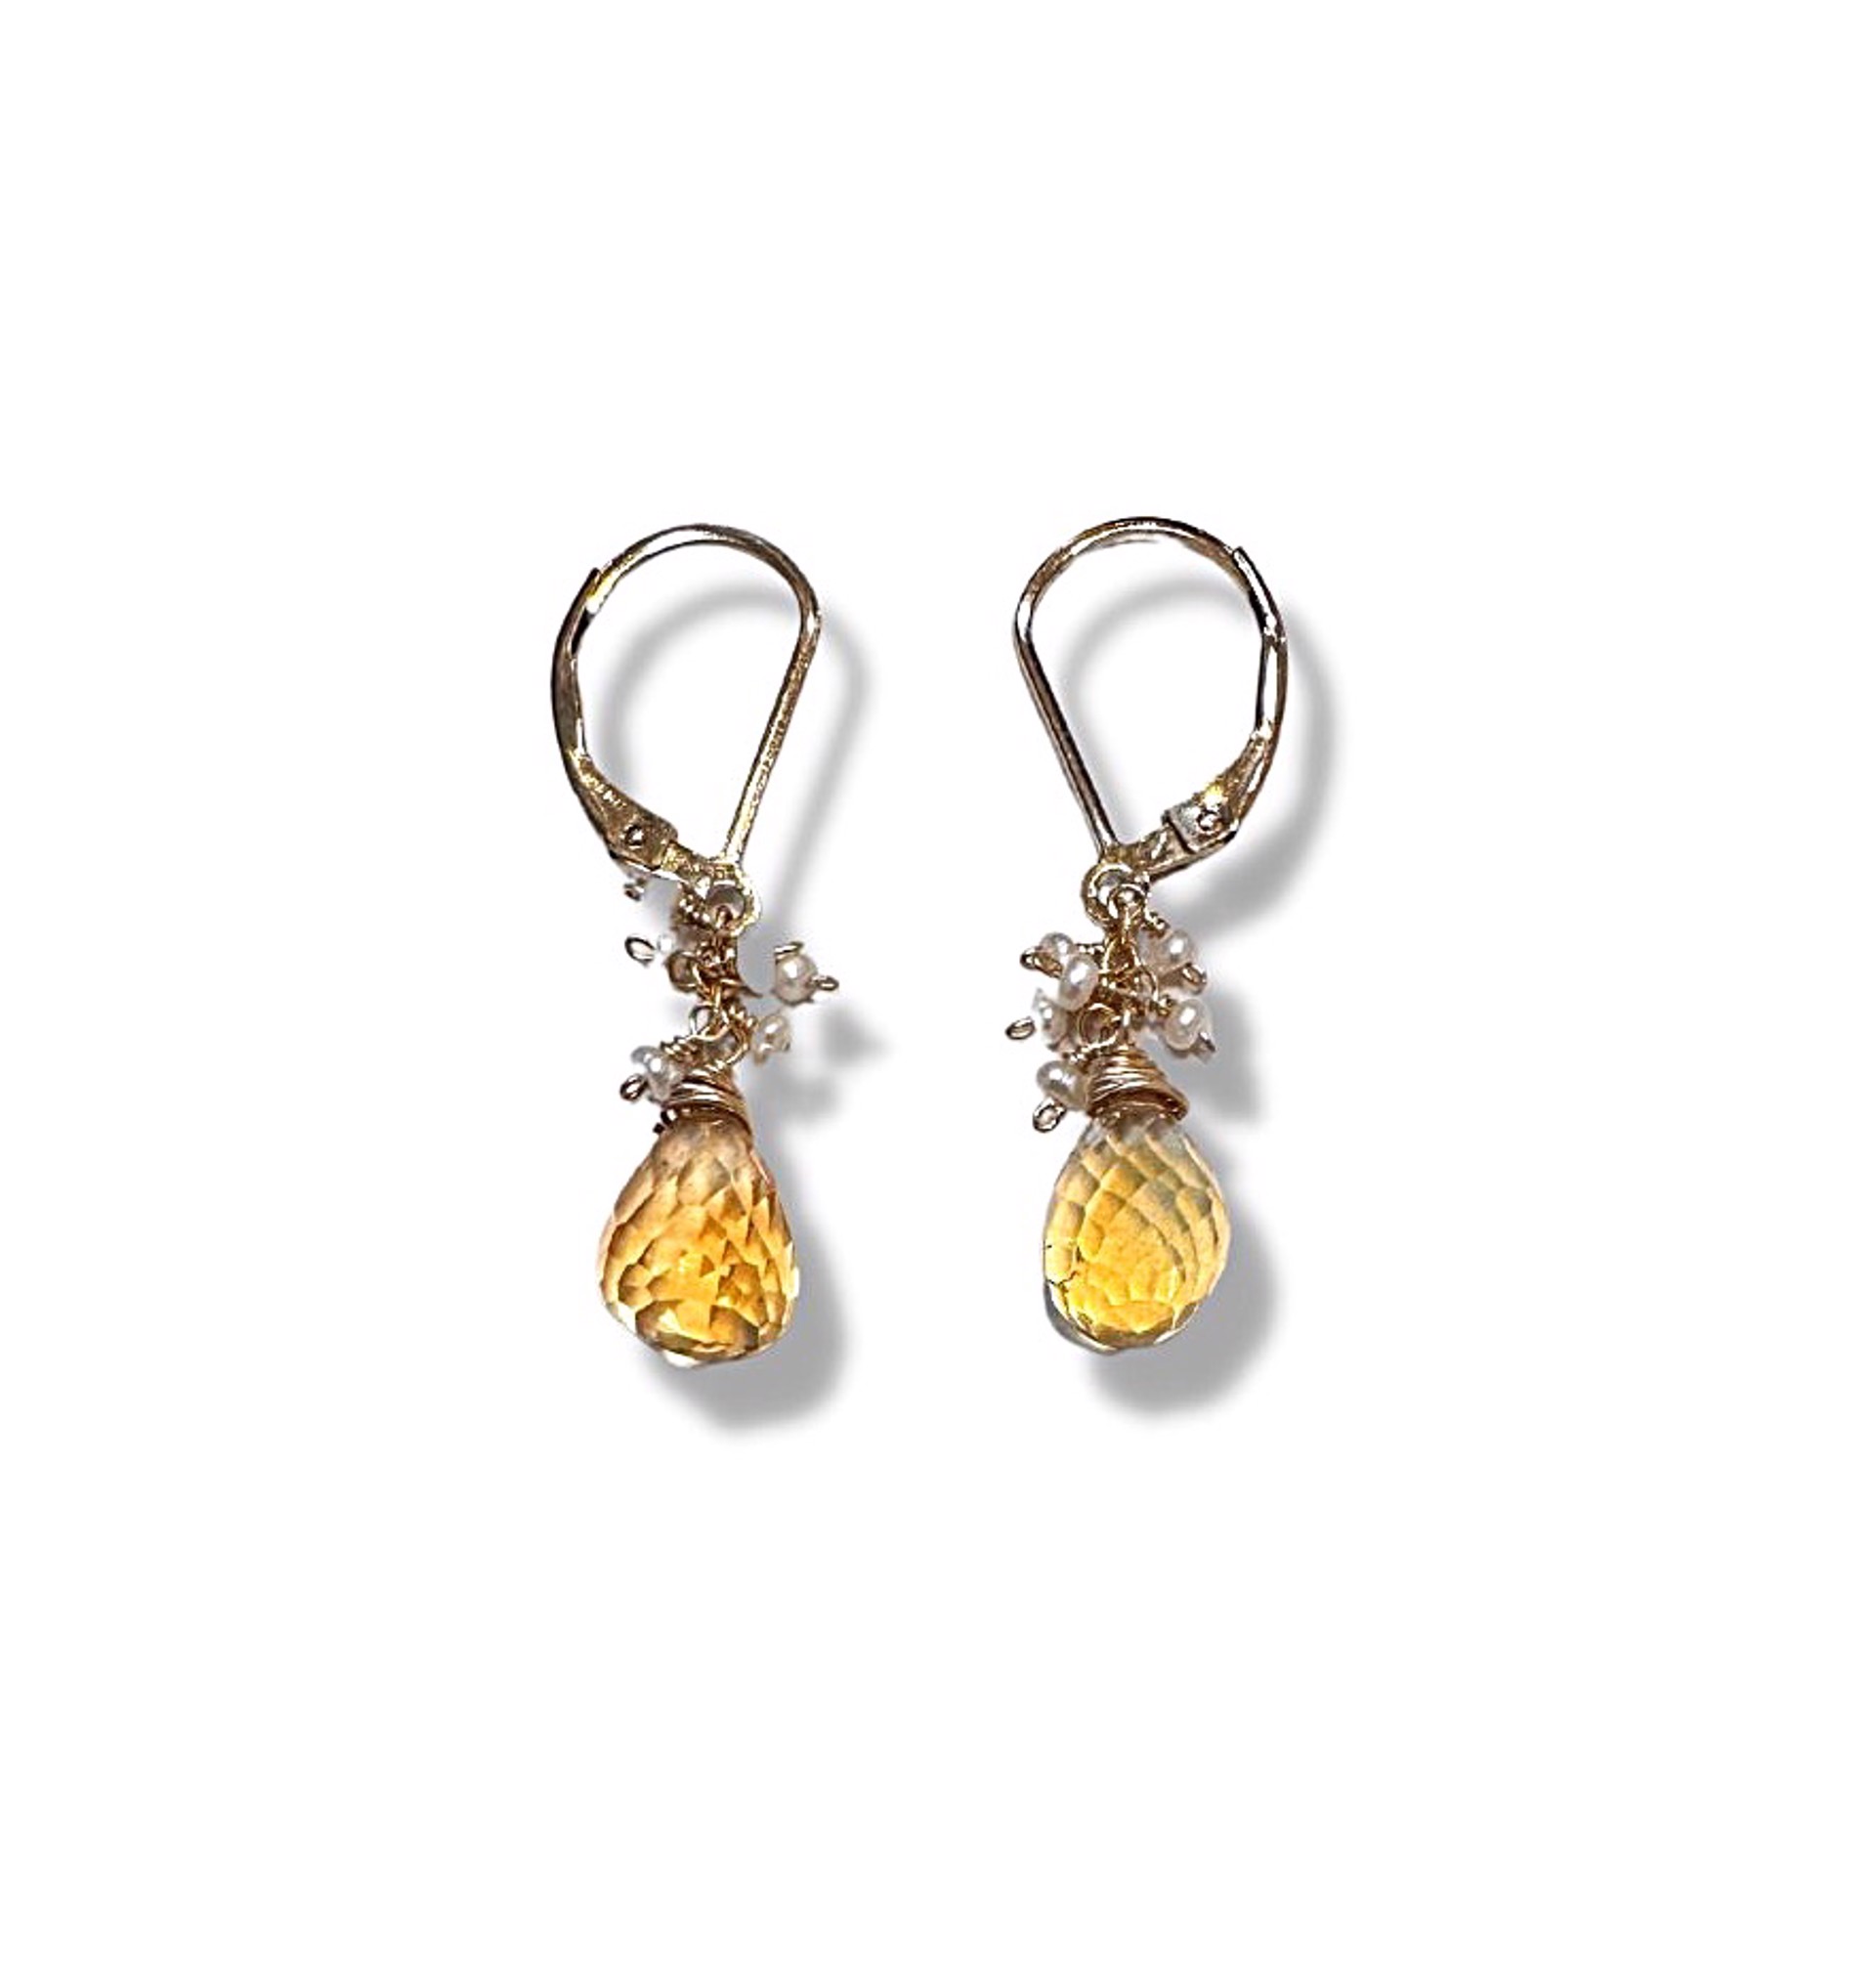 Earrings - Citrine Drops with Freshwater Pearl by Julia Balestracci